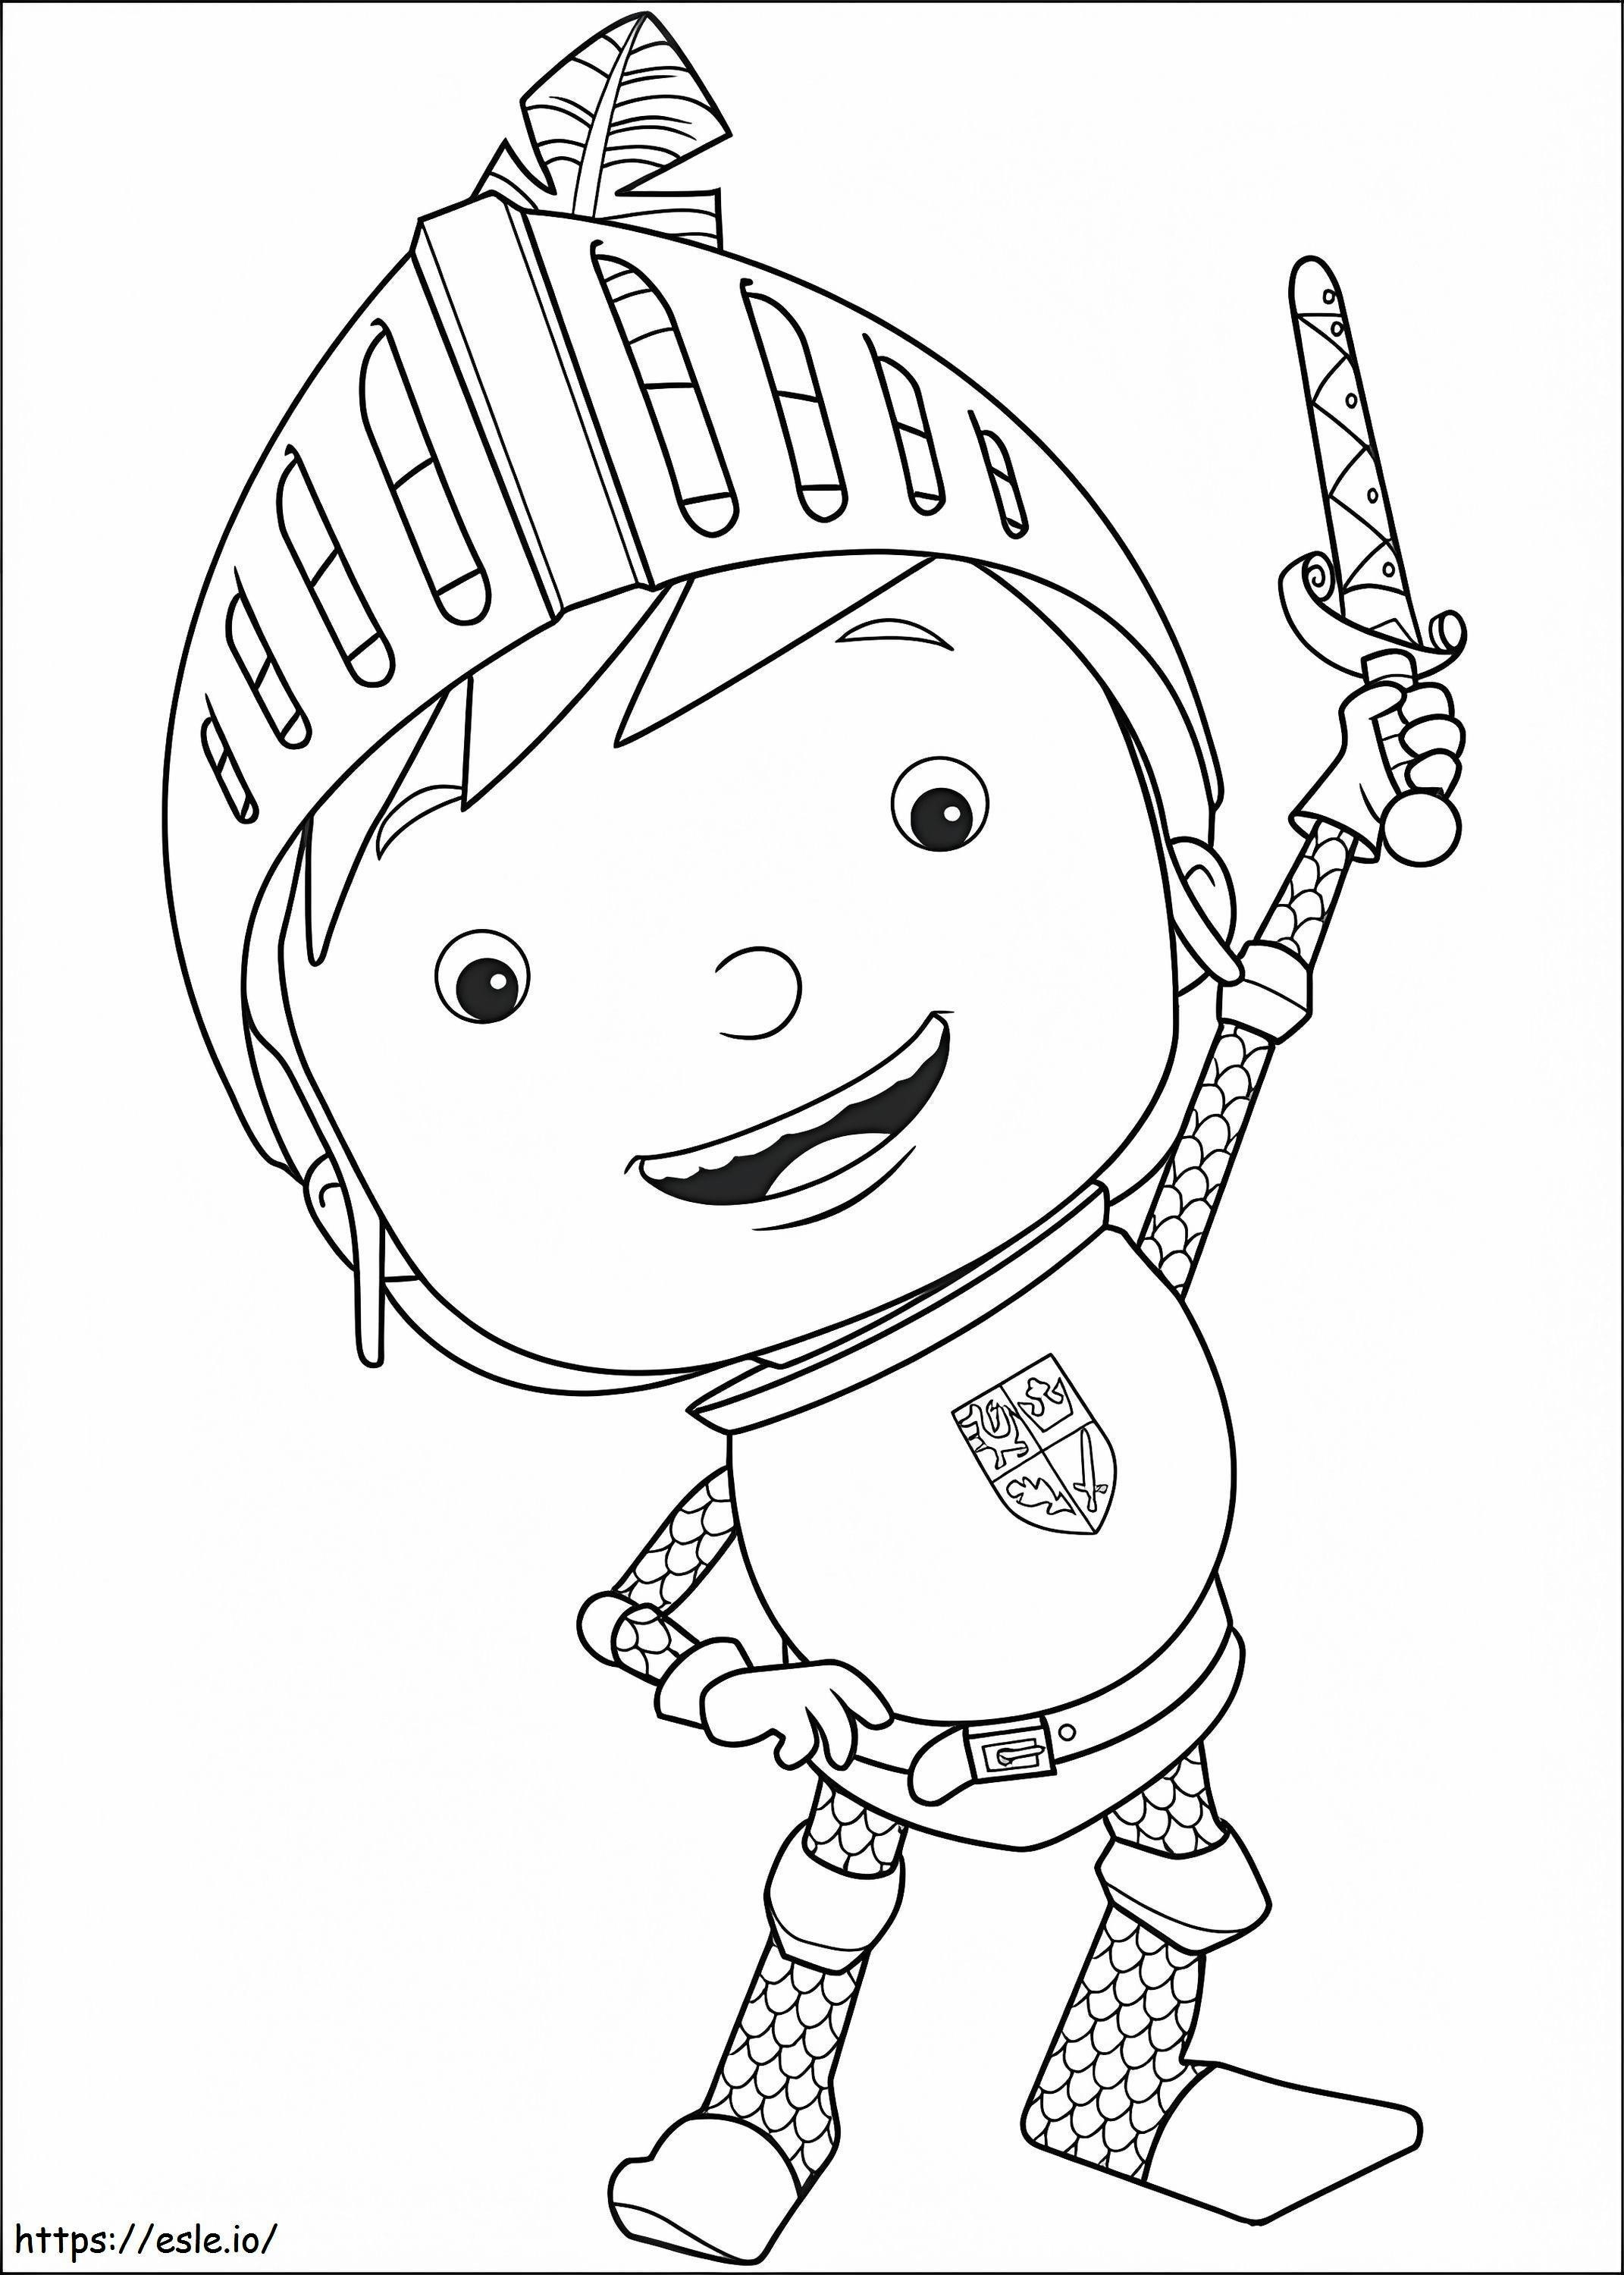 Mike The Knight coloring page